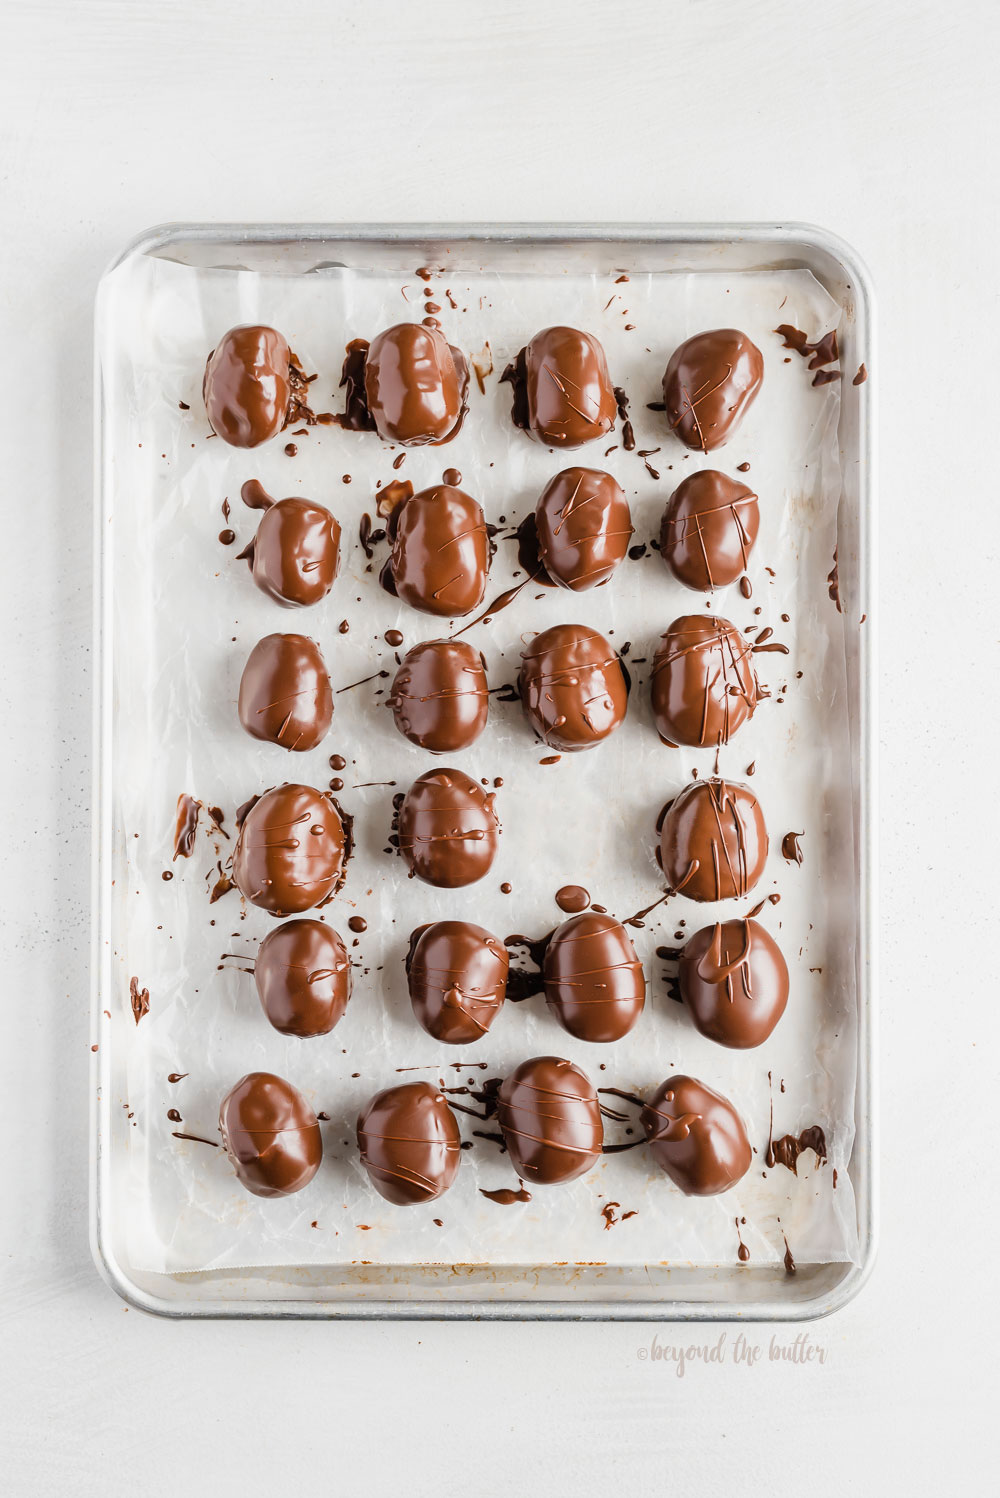 Overhead photo of chocolate covered peanut butter eggs on a baking sheet with one removed | Image and Copyright Policy: © Beyond the Butter, LLC